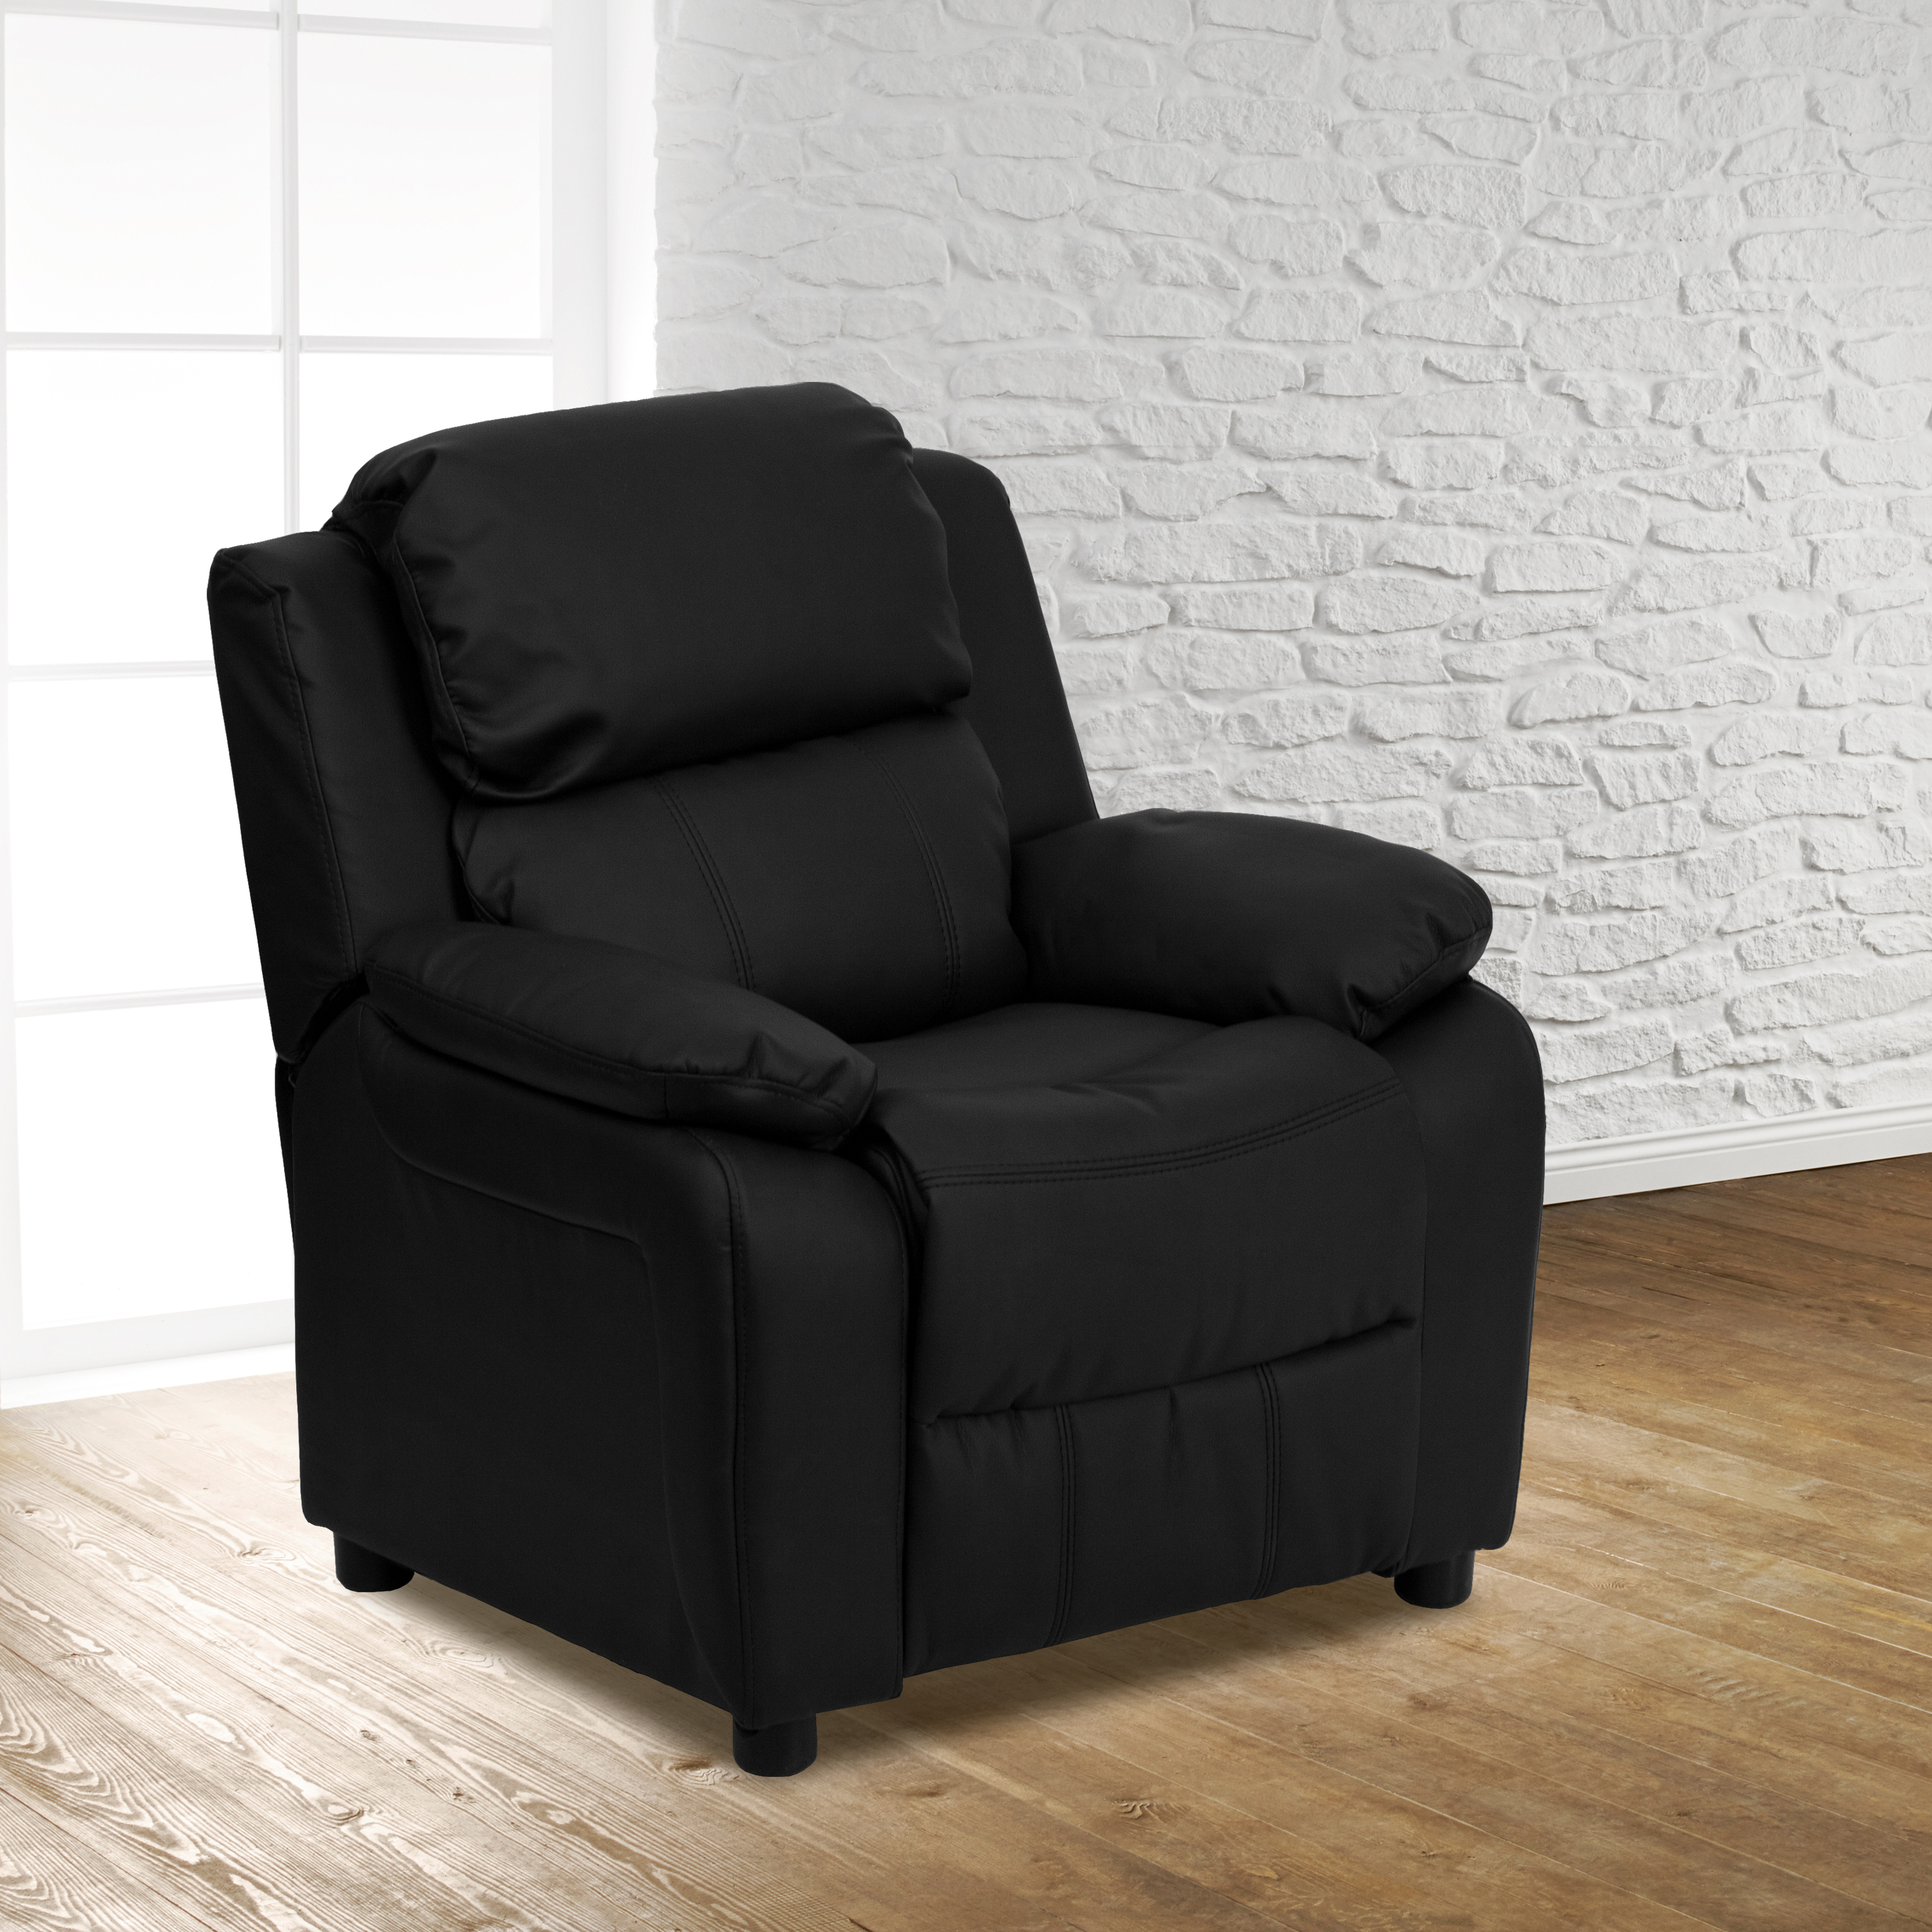 Flash Furniture Deluxe Padded Contemporary Black LeatherSoft Kids Recliner with Storage Arms - image 1 of 13